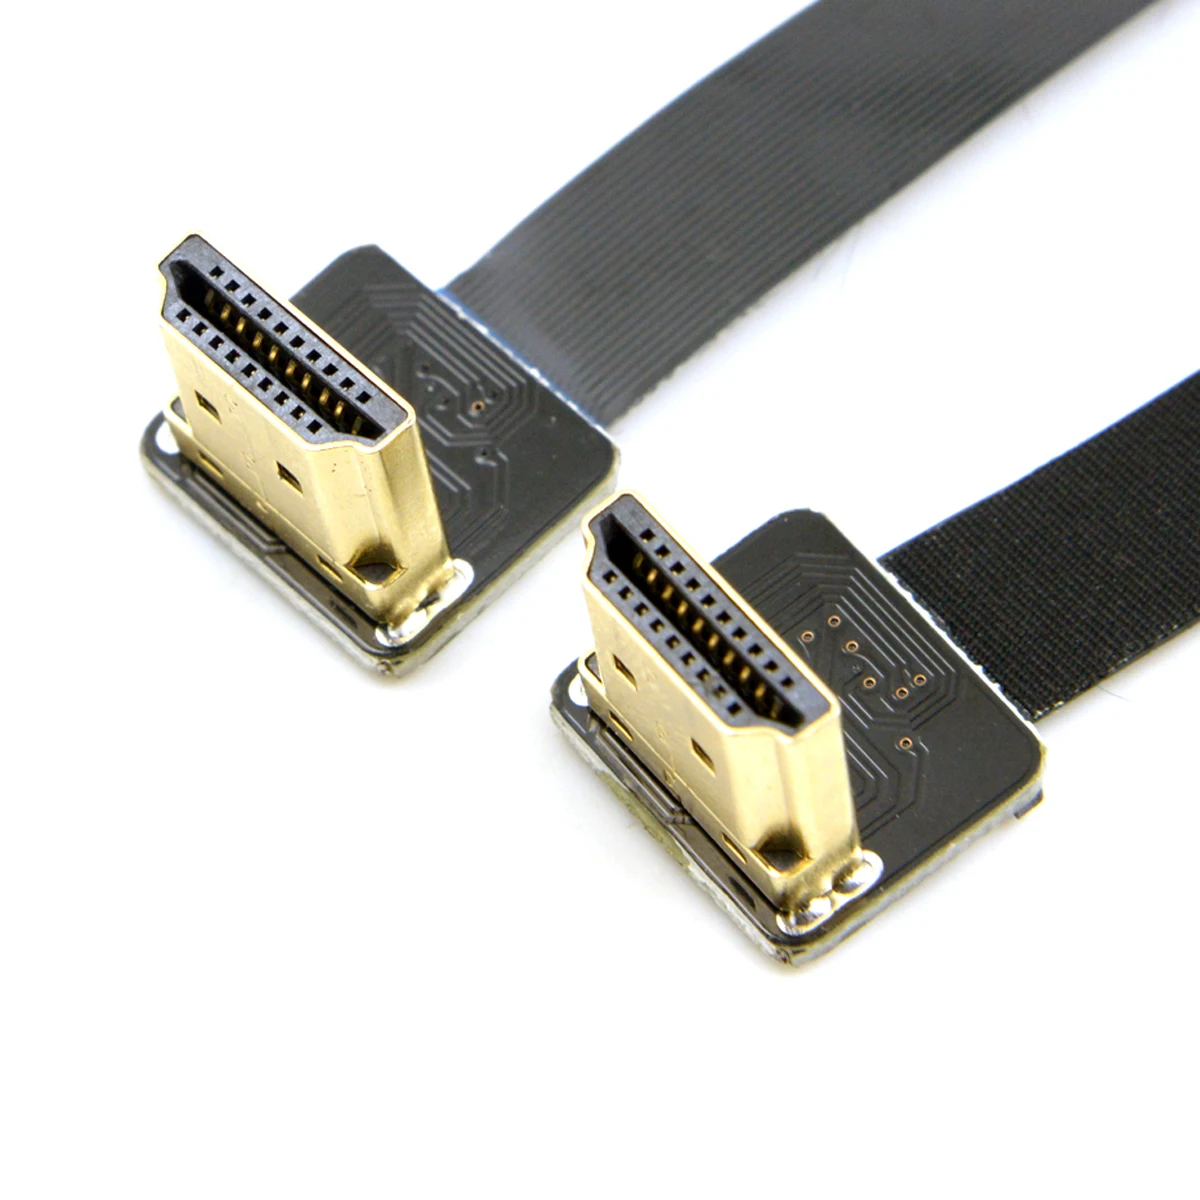 

CY Dual Up Angled 90 Degree HDMI-compatible Type A Male to Male HDTV FPC Flat Cable for FPV HDTV Multicopter Aerial 50cm